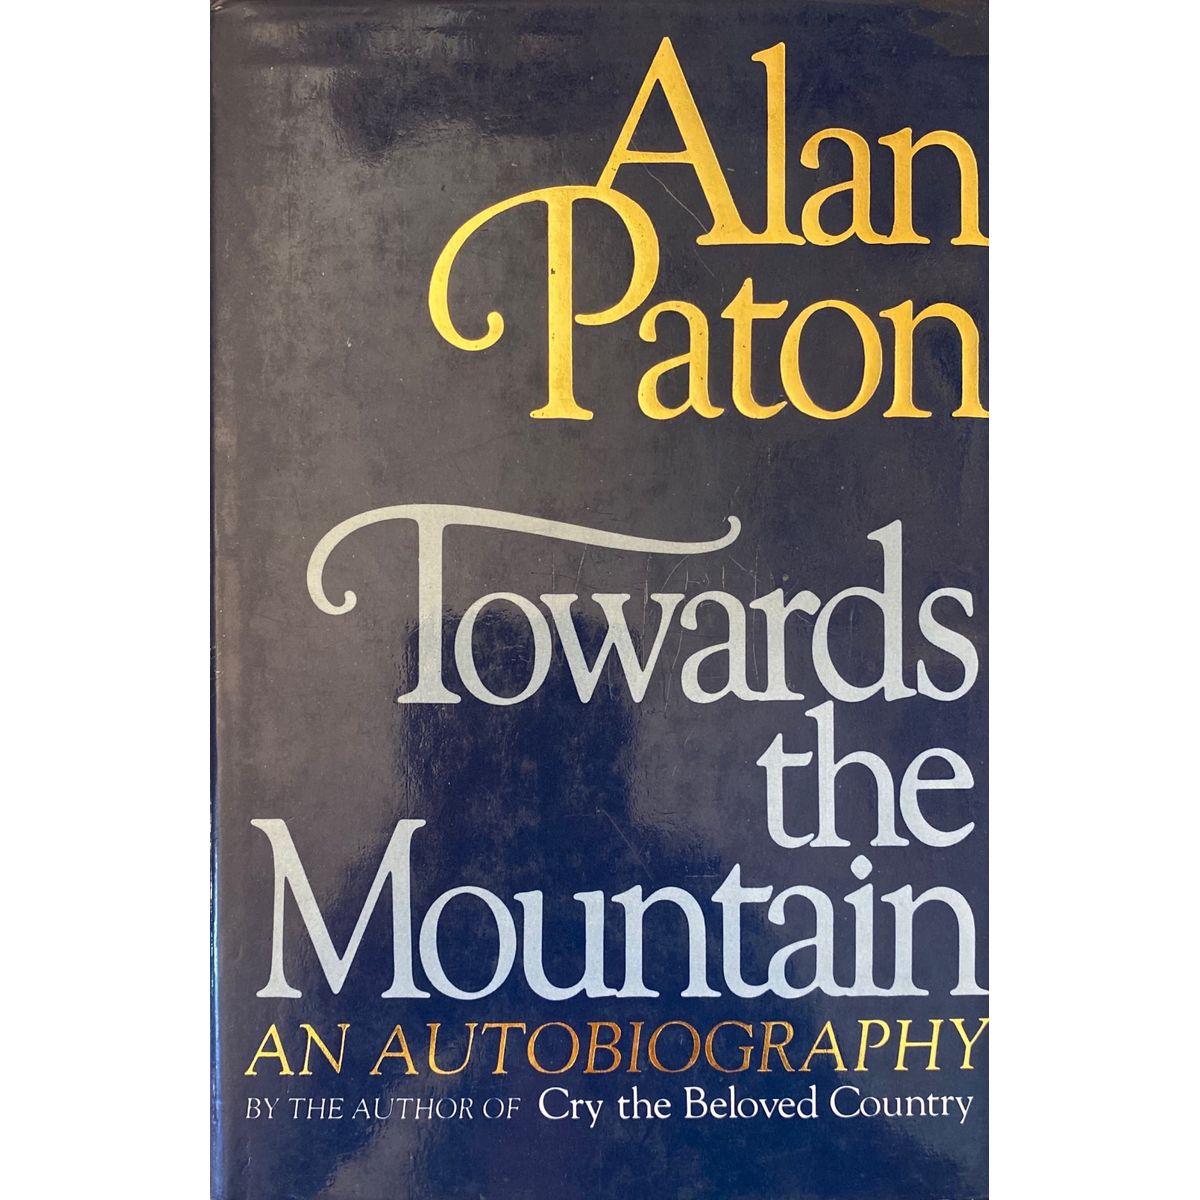 ISBN: 9780908396412 / 0908396414 - Towards the Mountain: An Autobiography by Alan Paton [1980]